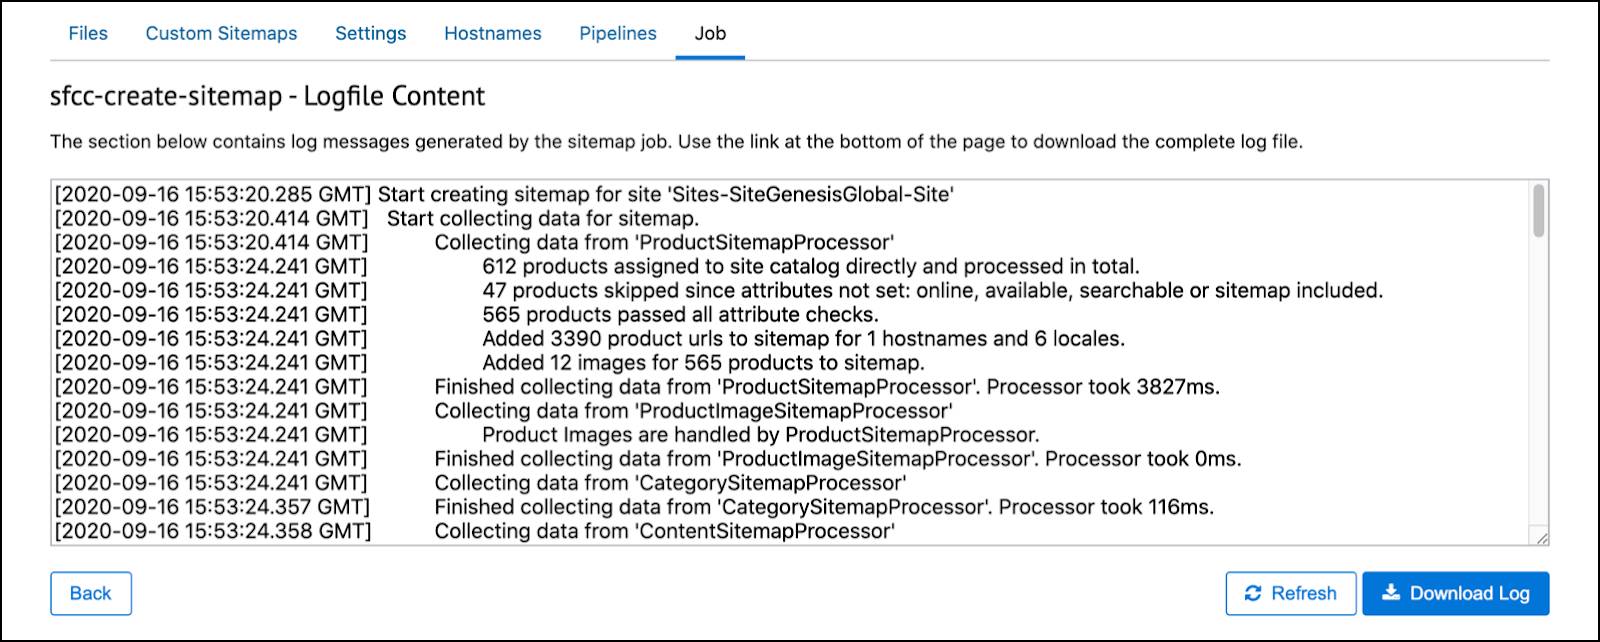 In Business Manager, view the sitemap job log file.